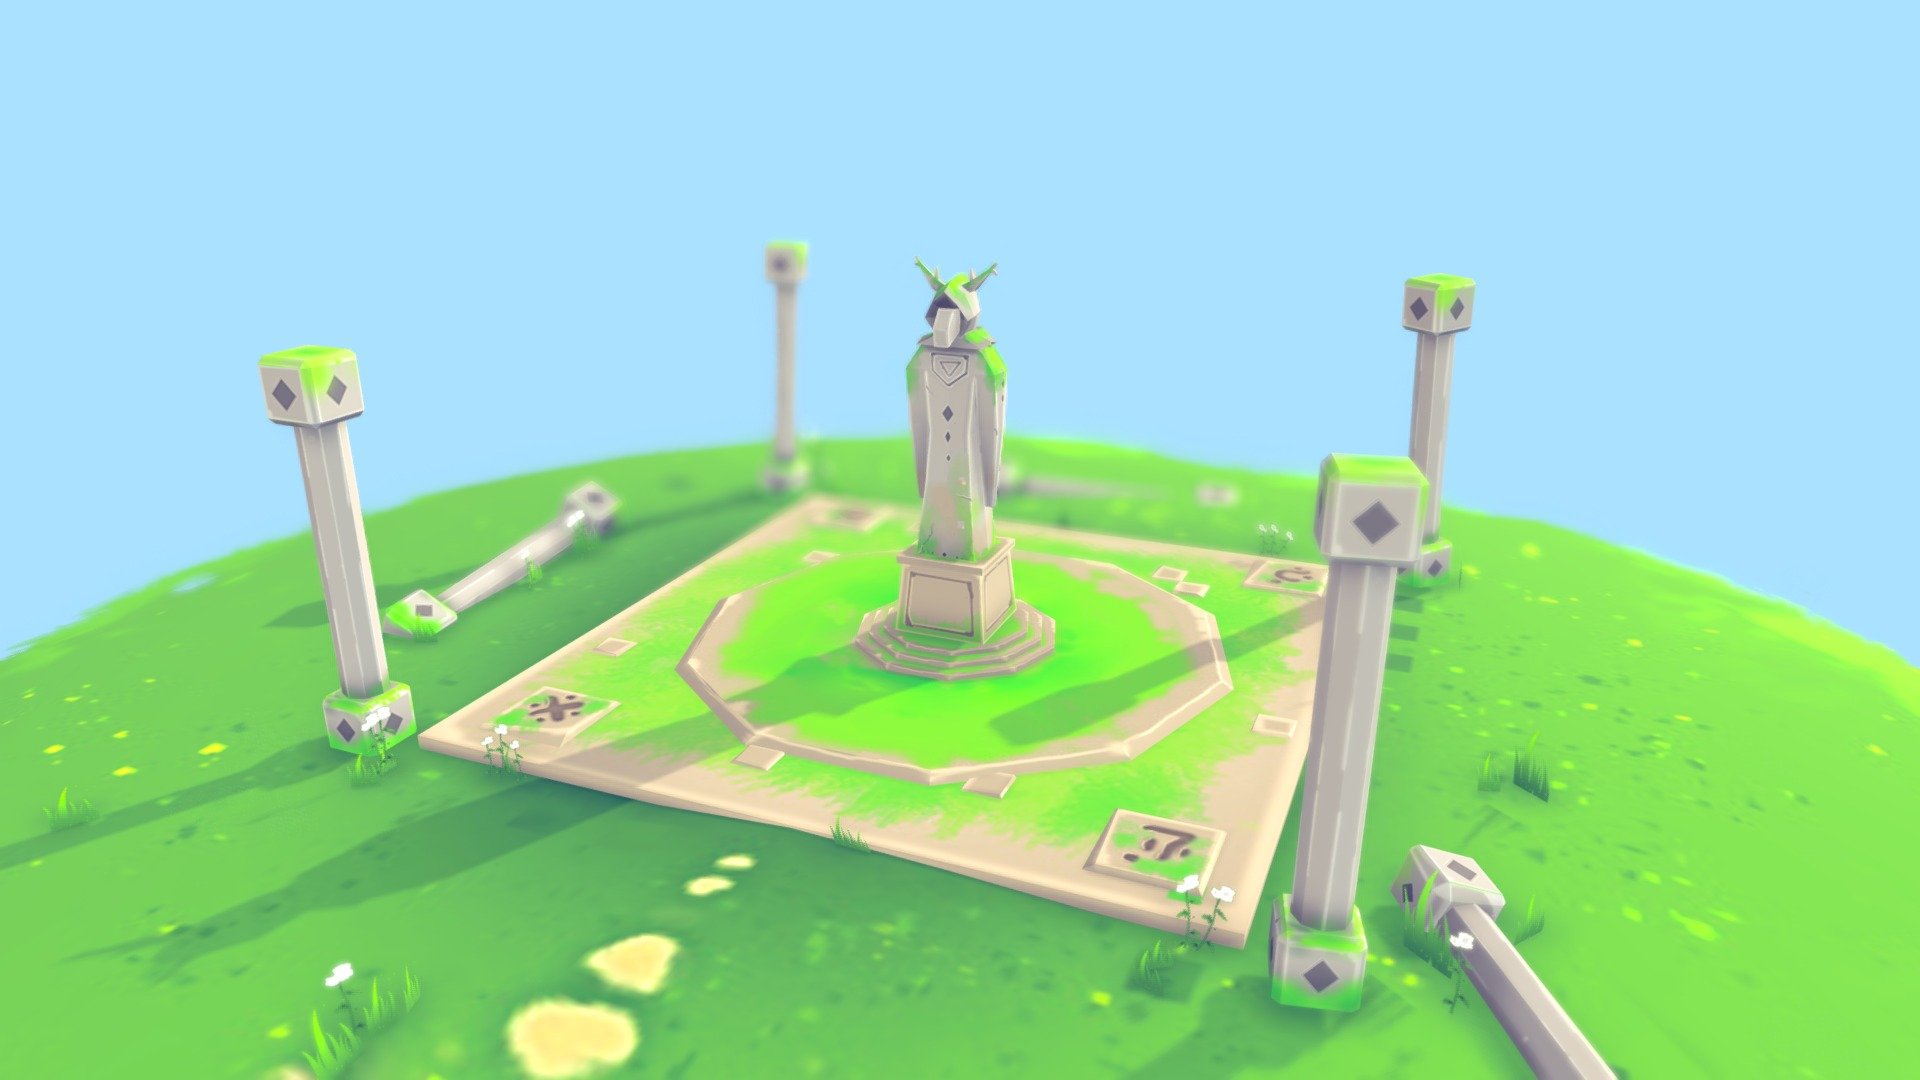 **Elf Lord Temple - Low poly handpainted stylized **

Wish you all have a very Happy New year 2022 :D ,
this is my first model i made in 2022.

so really excited to share with you all :)

*This is a low poly handpainted stylized Game level design
Elf lord temple overgrown my own concept. *

Demo FPS play here https://playcanv.as/p/w1q4HBnG/

this is best for low poly games or mobile games,so feel free to use it in your upcoming games or projects you are working on.

Contents you will get
1 FBX with textures embedded
1 gLTF with textures embedded
All textures (Base color and Opacity map)
*All textures are 512x512, it will not consume the memory when rendering or playing in realtime :) *

Please leave a comment and share your views,also if you are buying the model please rate the model and write a review.

Thank you! 

Follow me : 

Artstation : https://www.artstation.com/imkarthik
Linkedin : https://www.linkedin.com/in/imkarthiknaidu/
Instagram : https://www.instagram.com/K3DART/ - Elf Lord Temple - Low poly handpainted stylized - Download Free 3D model by Karthik Naidu (@Karthiknaidu97) 3d model